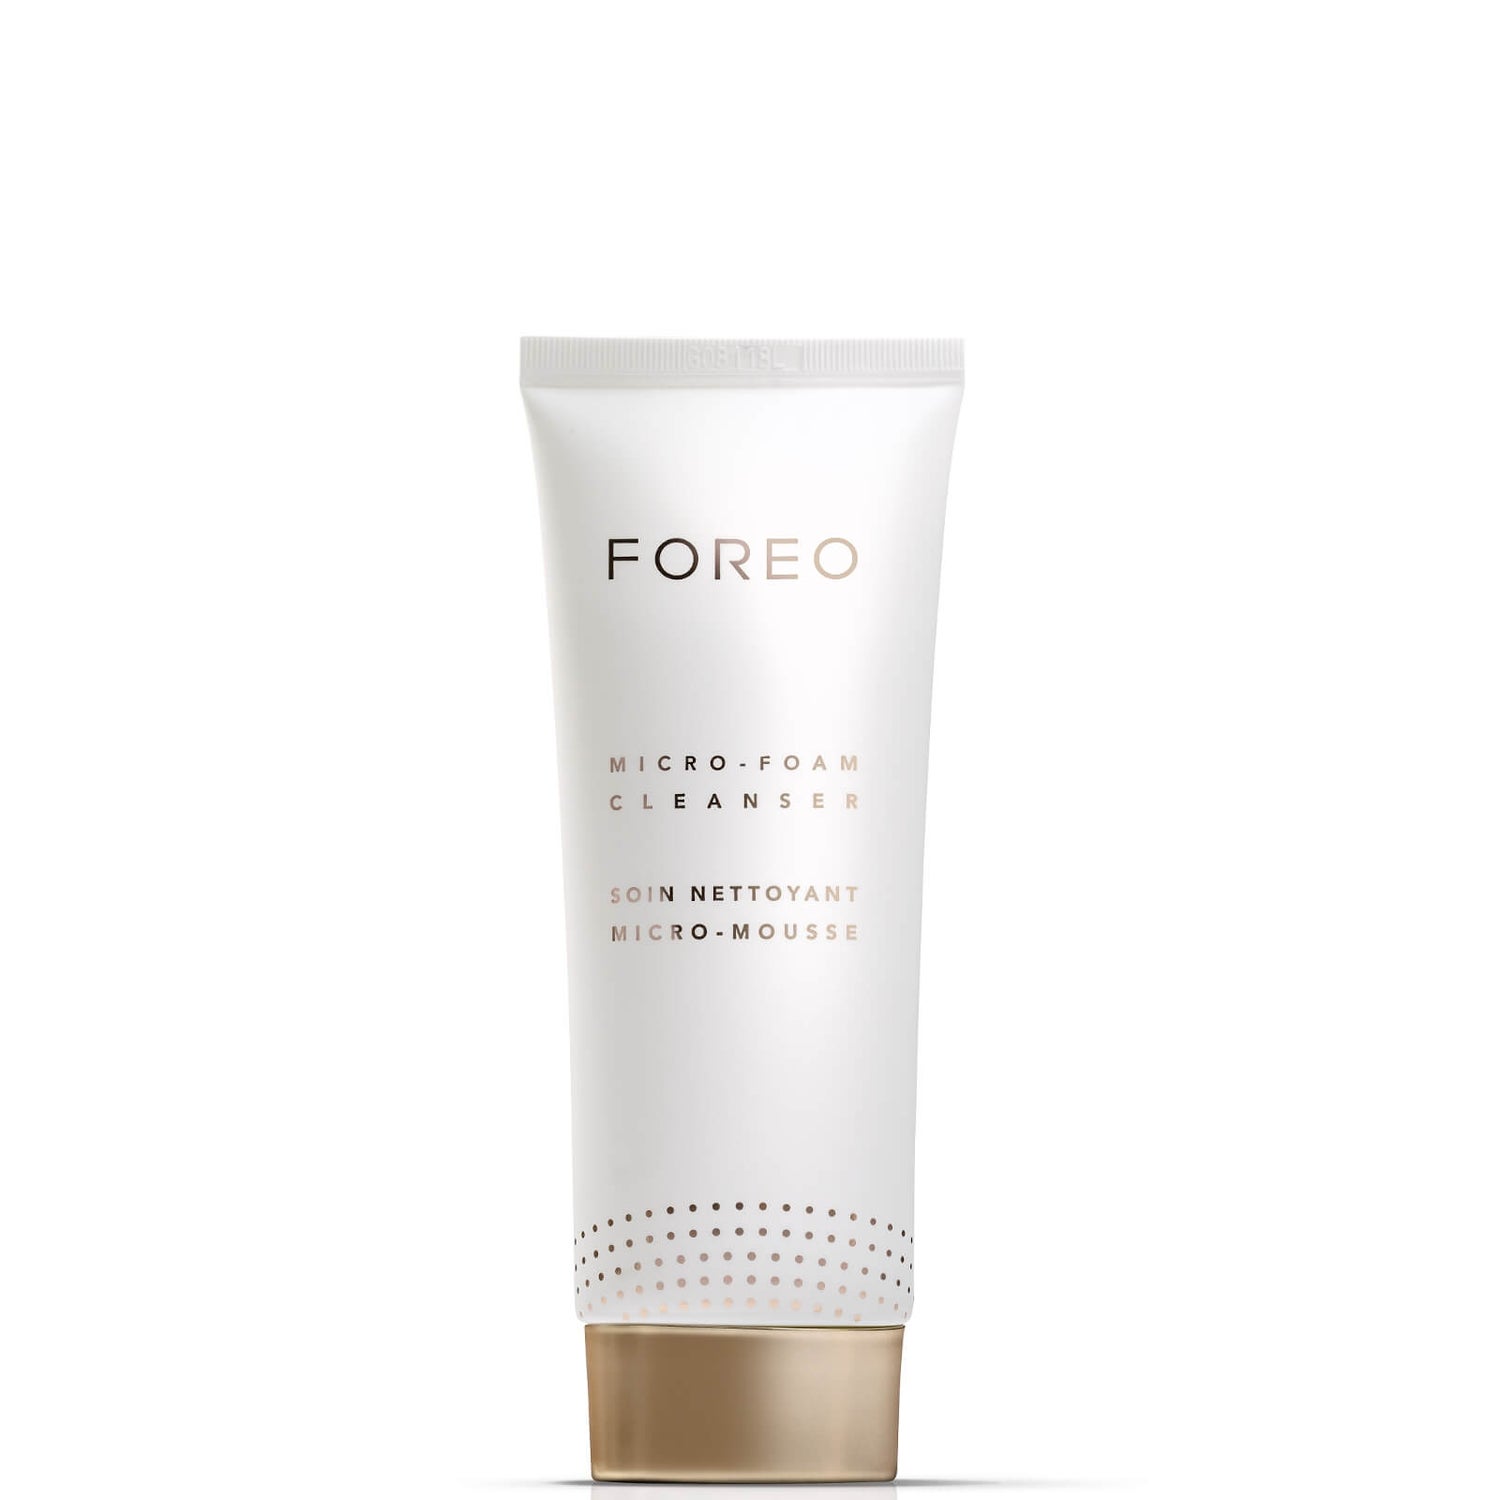 FOREO Cruelty-Free and Vegan Micro-Foam Cleanser (Various Sizes)